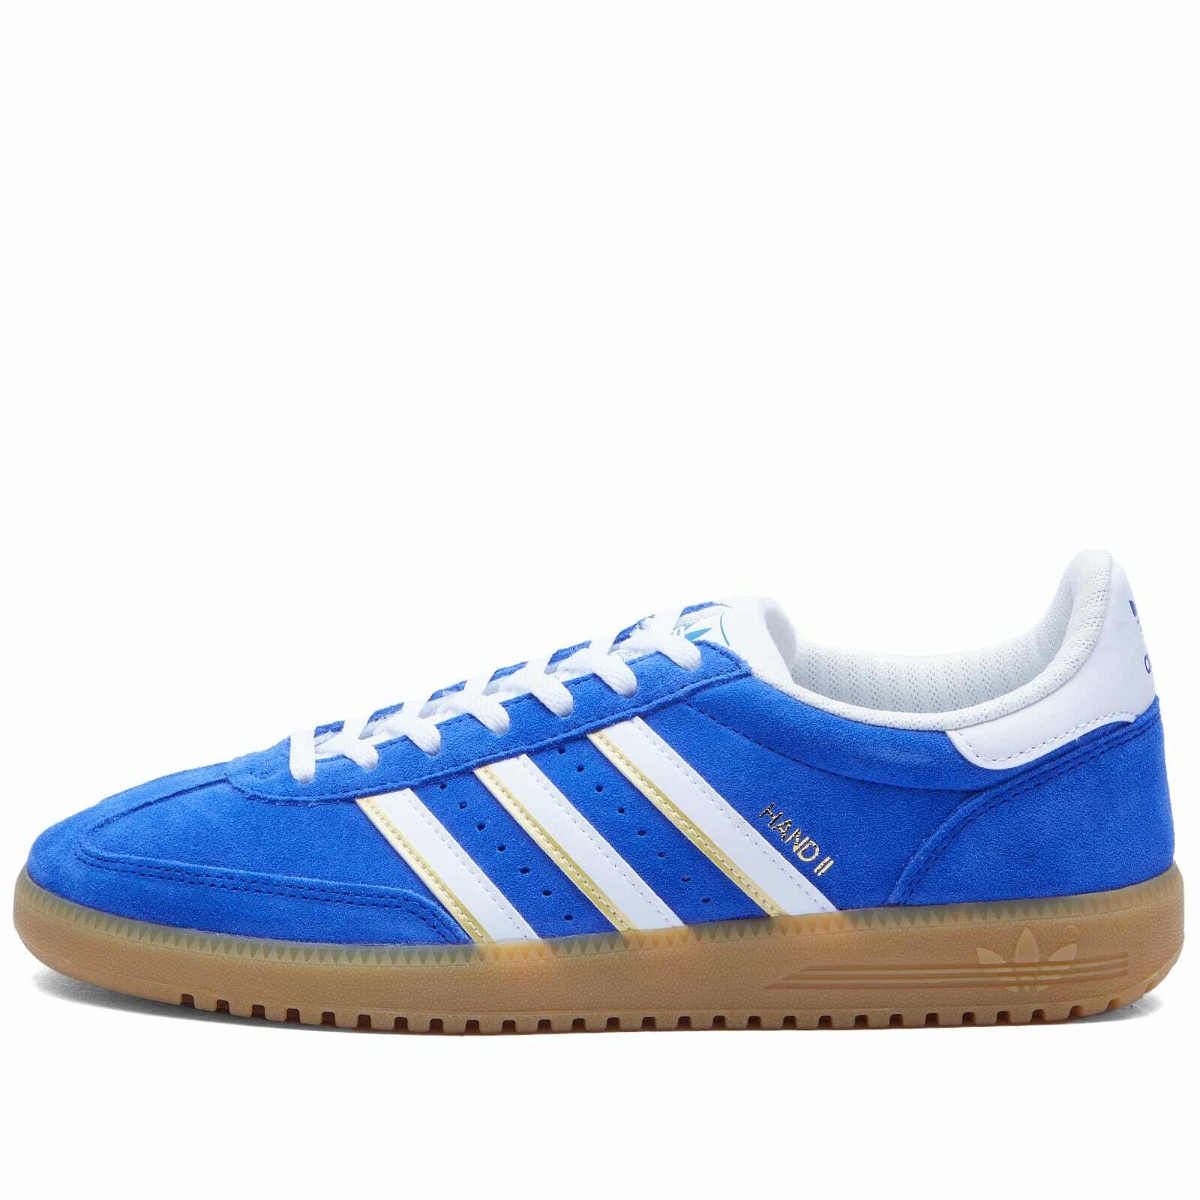 Adidas Hand 2 Lucid Sneakers adidas Semi Blue/White in